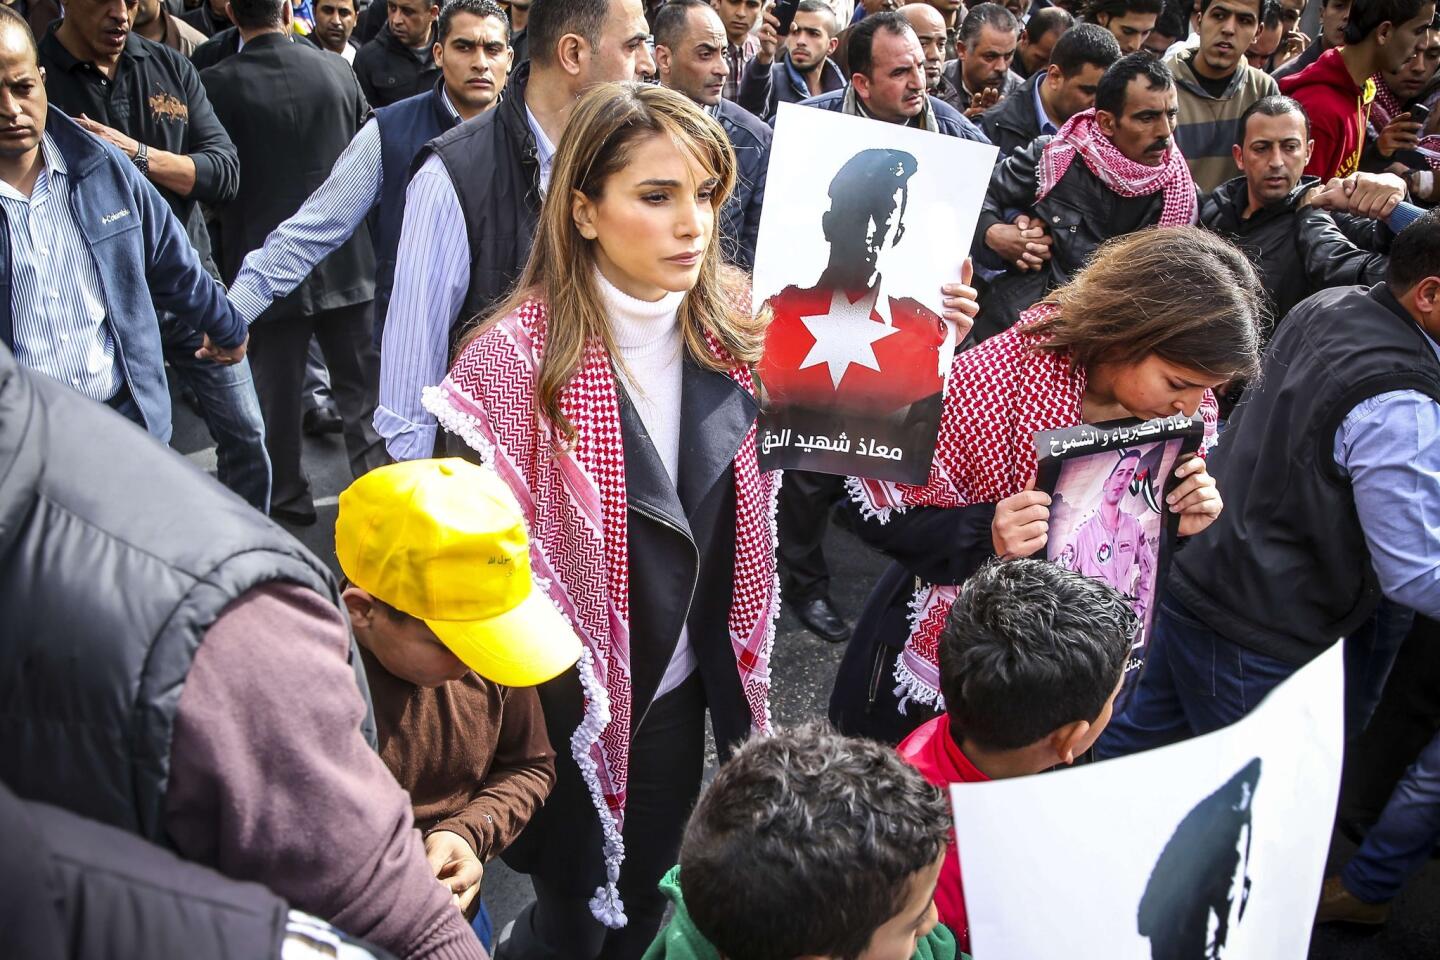 A photograph distributed Friday by the office of Jordanian Queen Rania shows the queen, at center, holding a placard during a rally in Amman to express solidarity with the pilot slain by Islamic State.